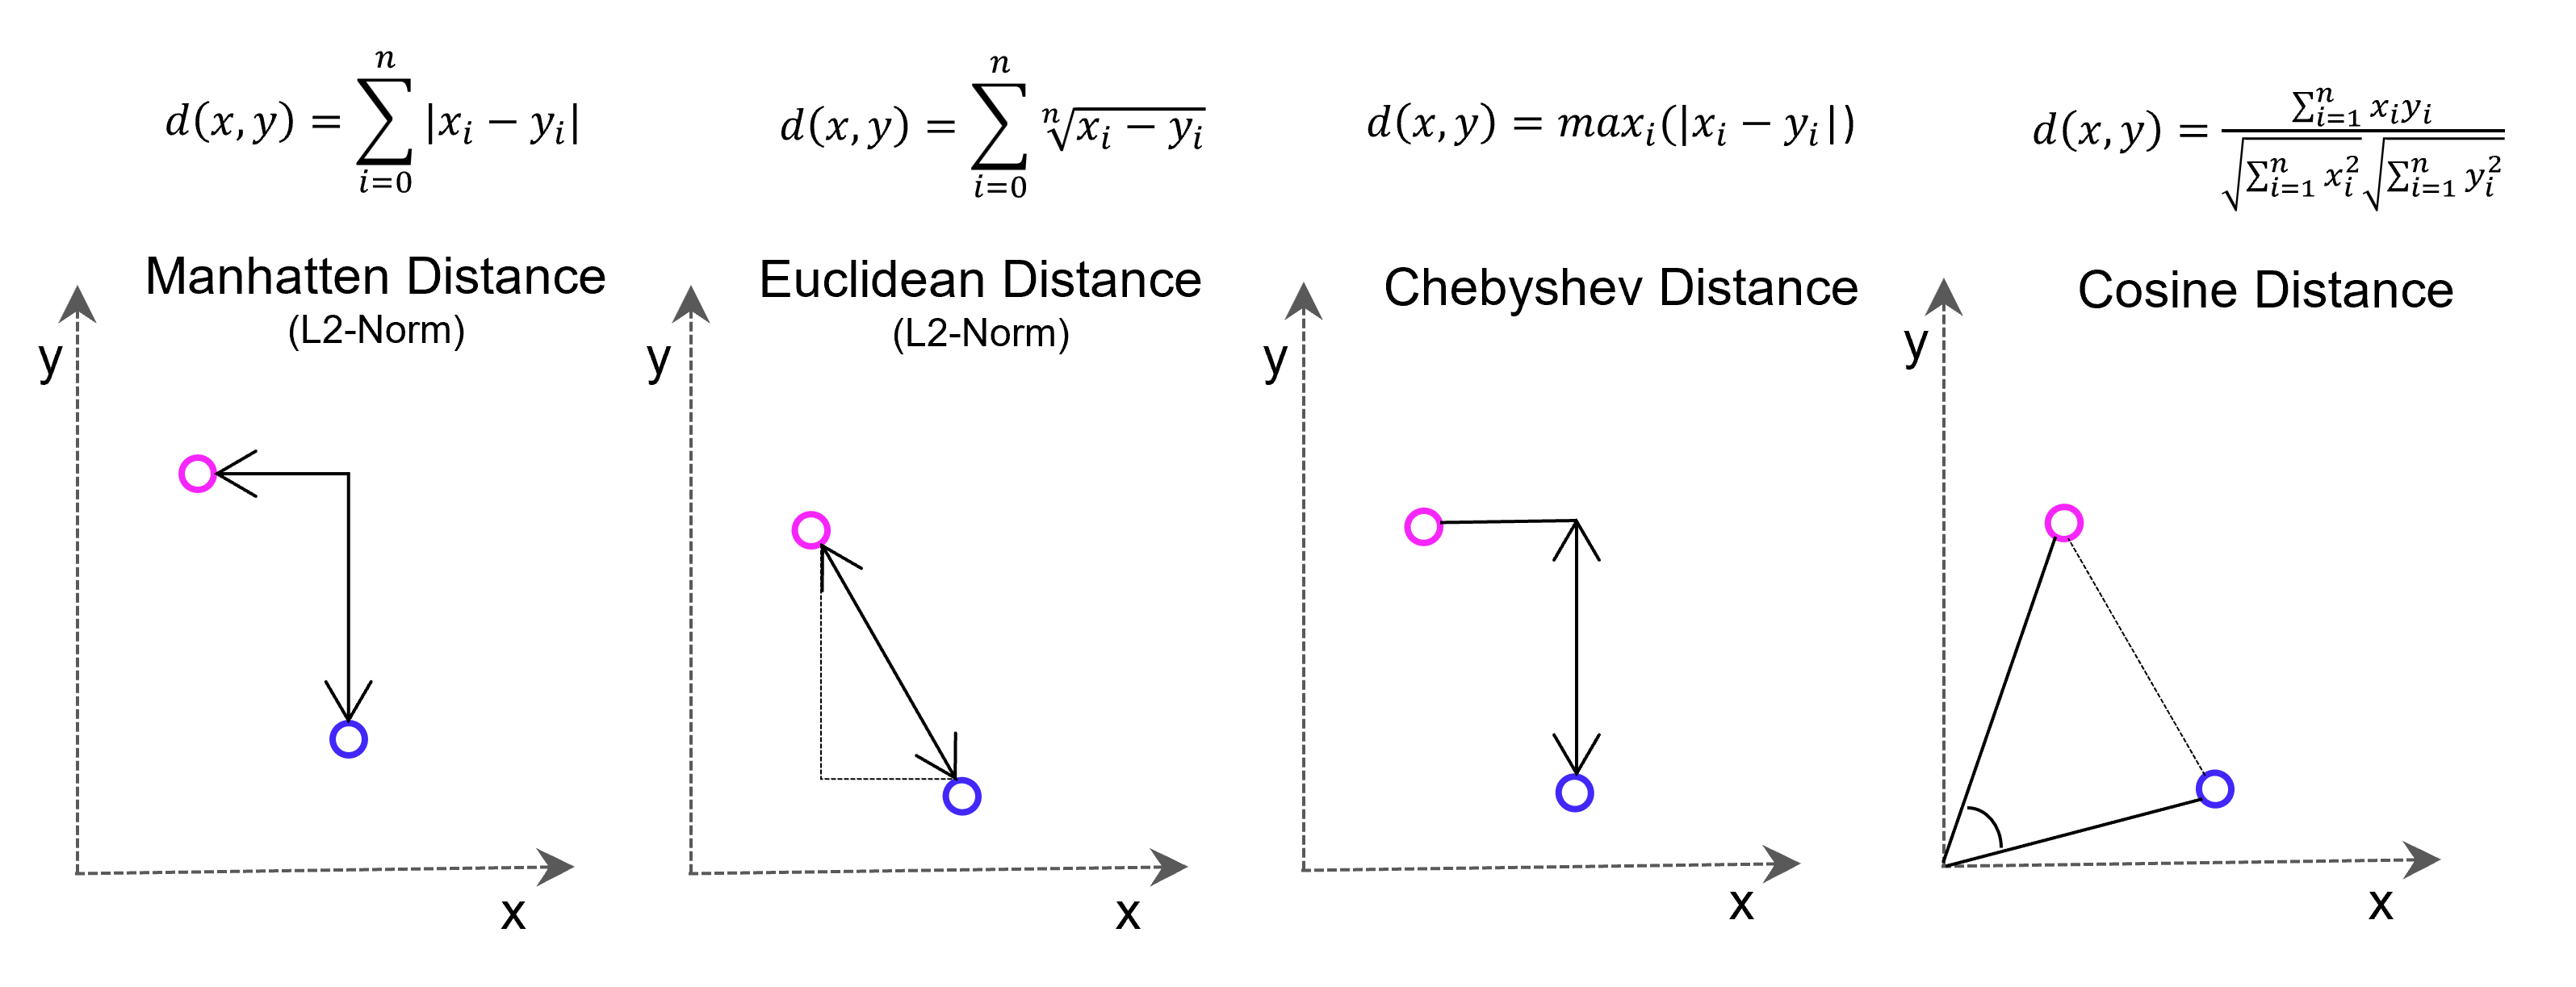 Vectore-based distance measuring methods: Euclidean Distance L2-Norm, Manhatten Distance L1-Norm, Chebyshev Distance and Cosine Distance